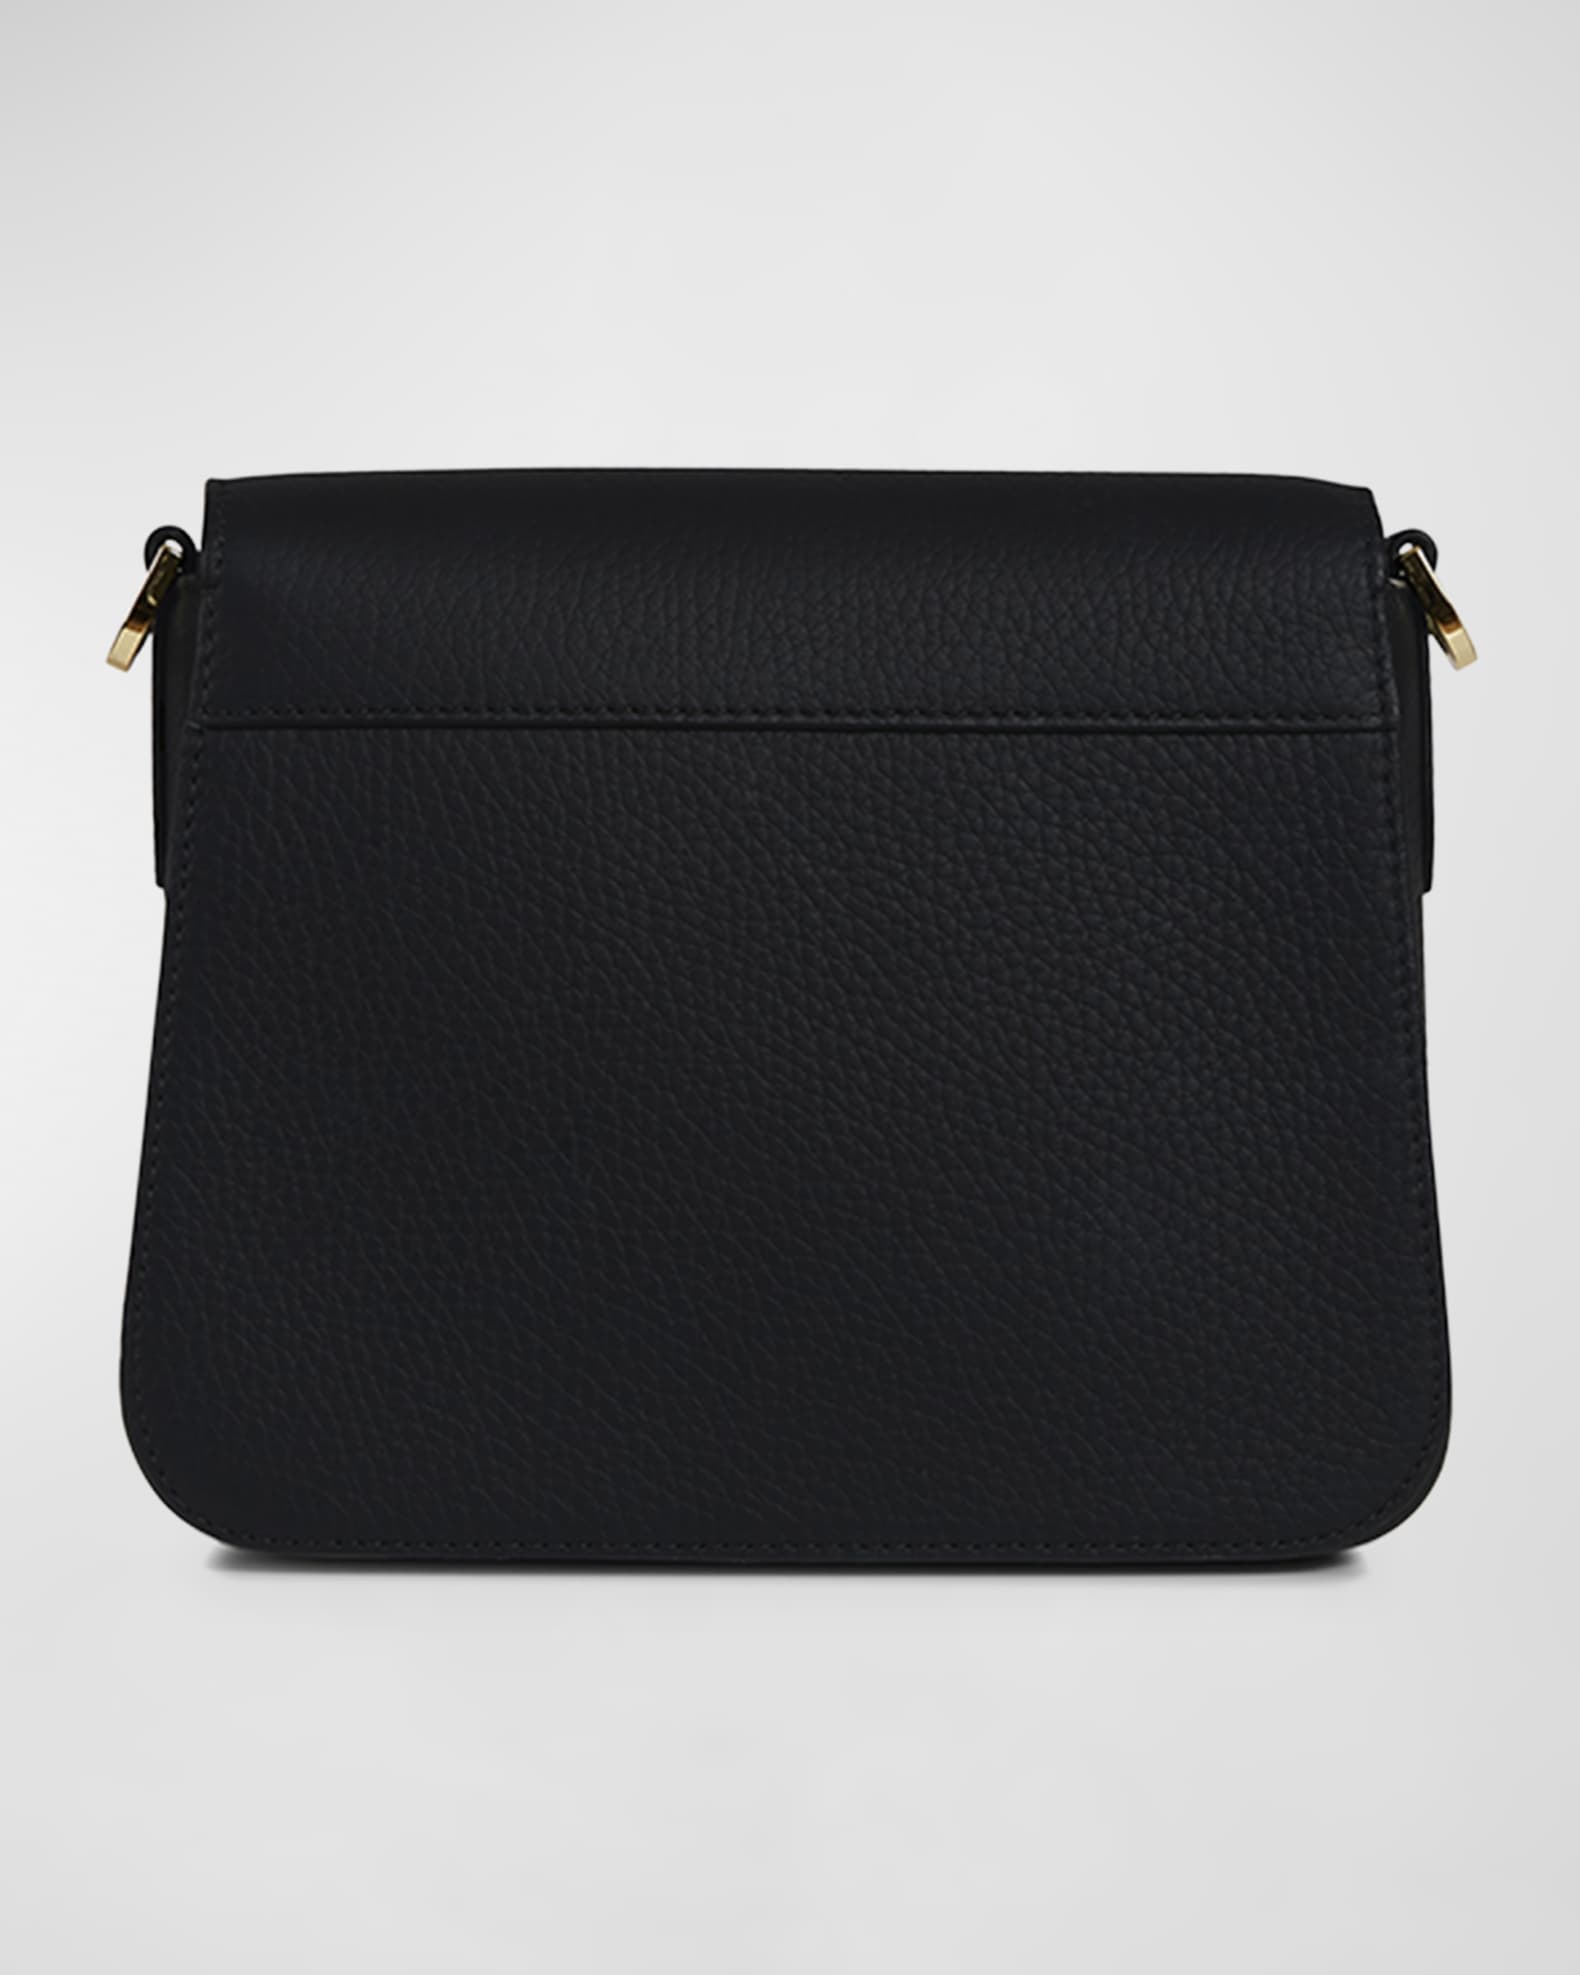 Strathberry Ace Mini Leather Crossbody Bag in Black